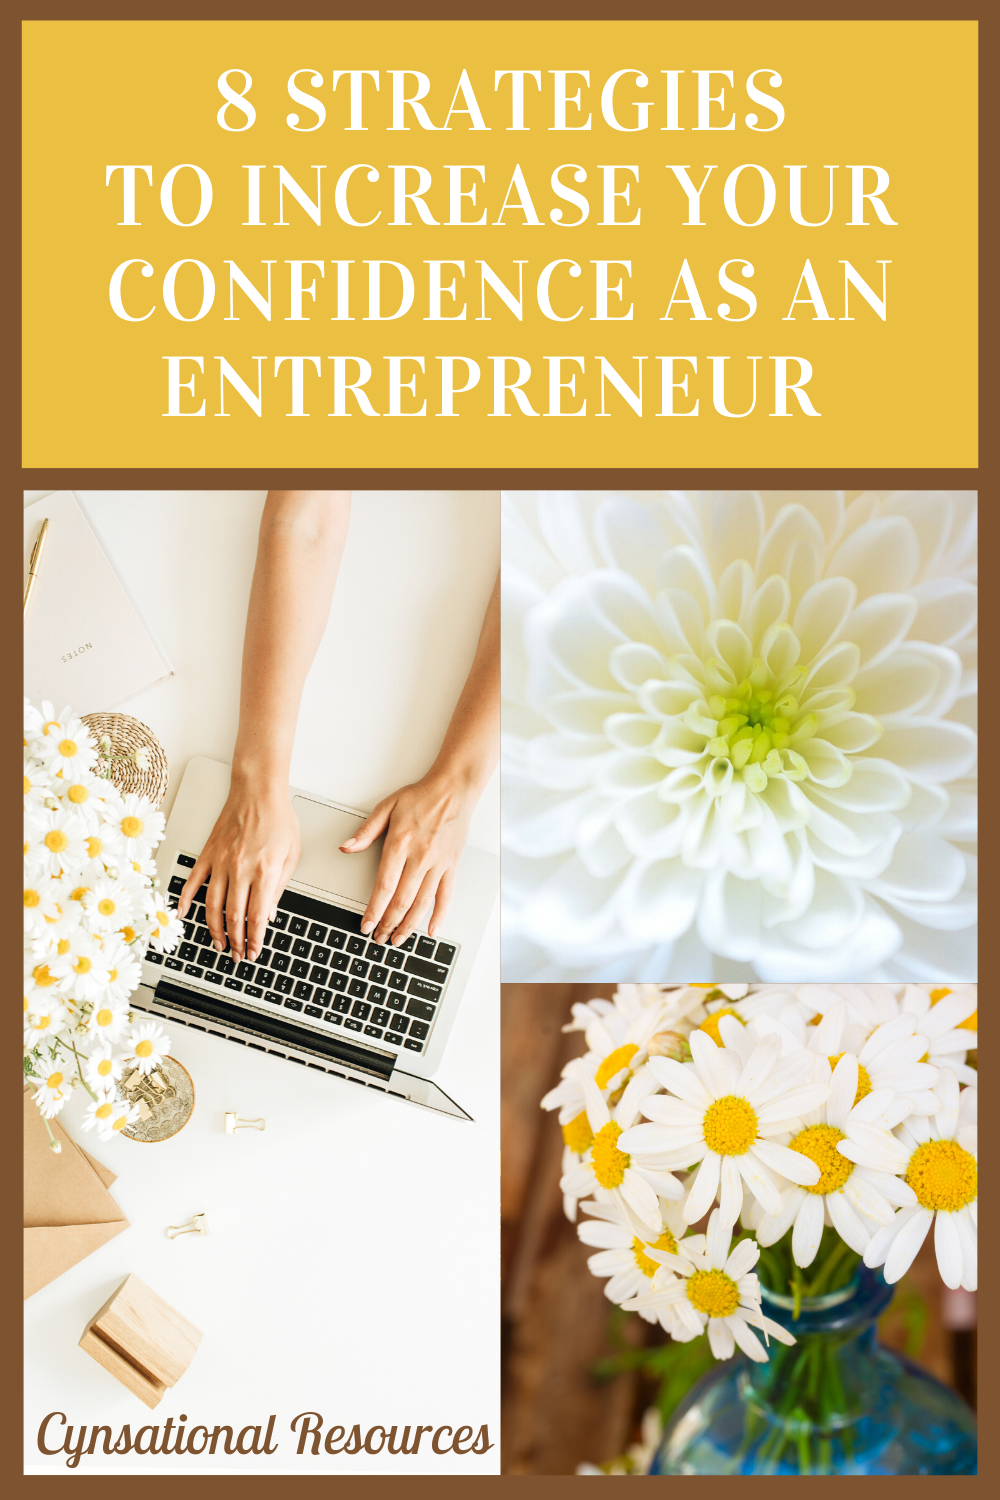 8 Strategies to Increase Your Entrepreneur Confidence